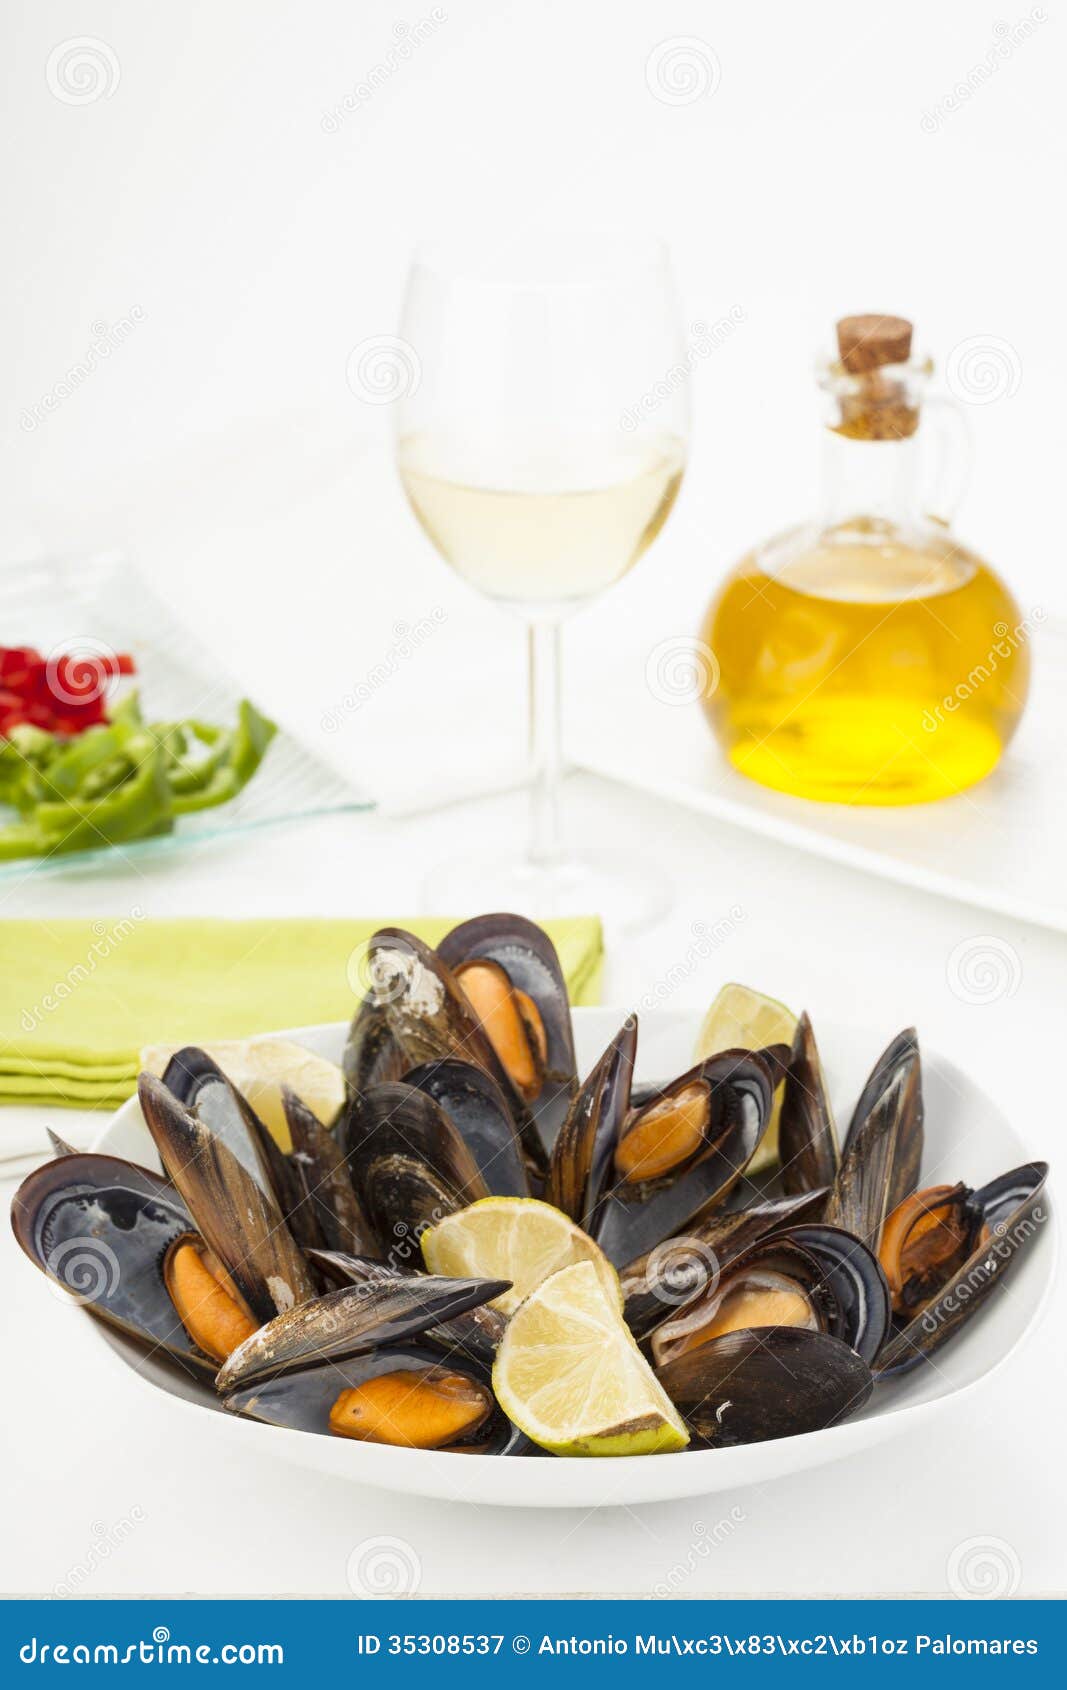 plate of coocked mussels with lemon  over white